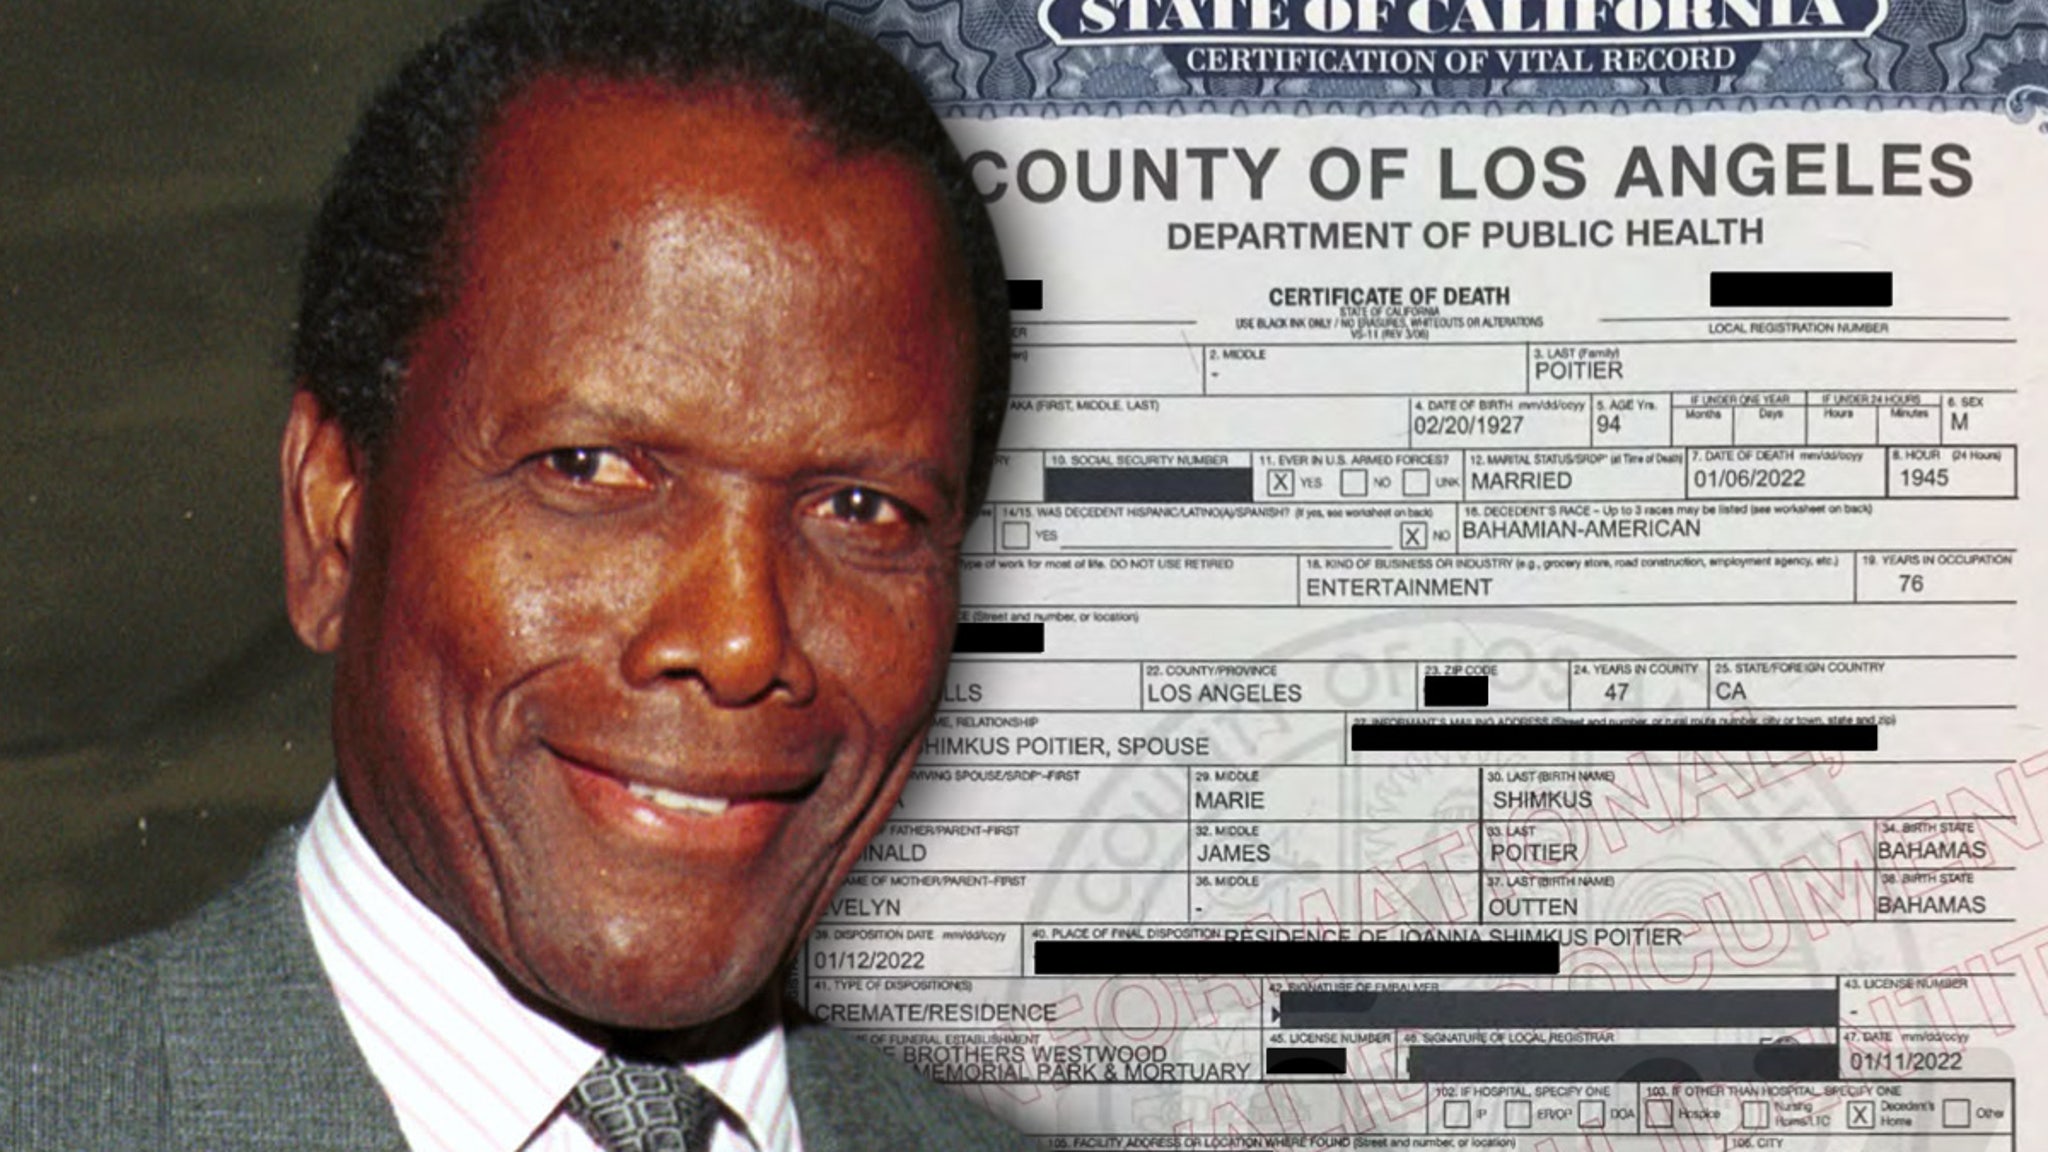 Sidney Poitier Died of Heart Failure, Dementia and Prostate Cancer - TMZ : Beloved actor Sidney Poitier died from a combination of heart failure, Alzheimer's dementia and prostate cancer ... according to his death certificate.  | Tranquility 國際社群